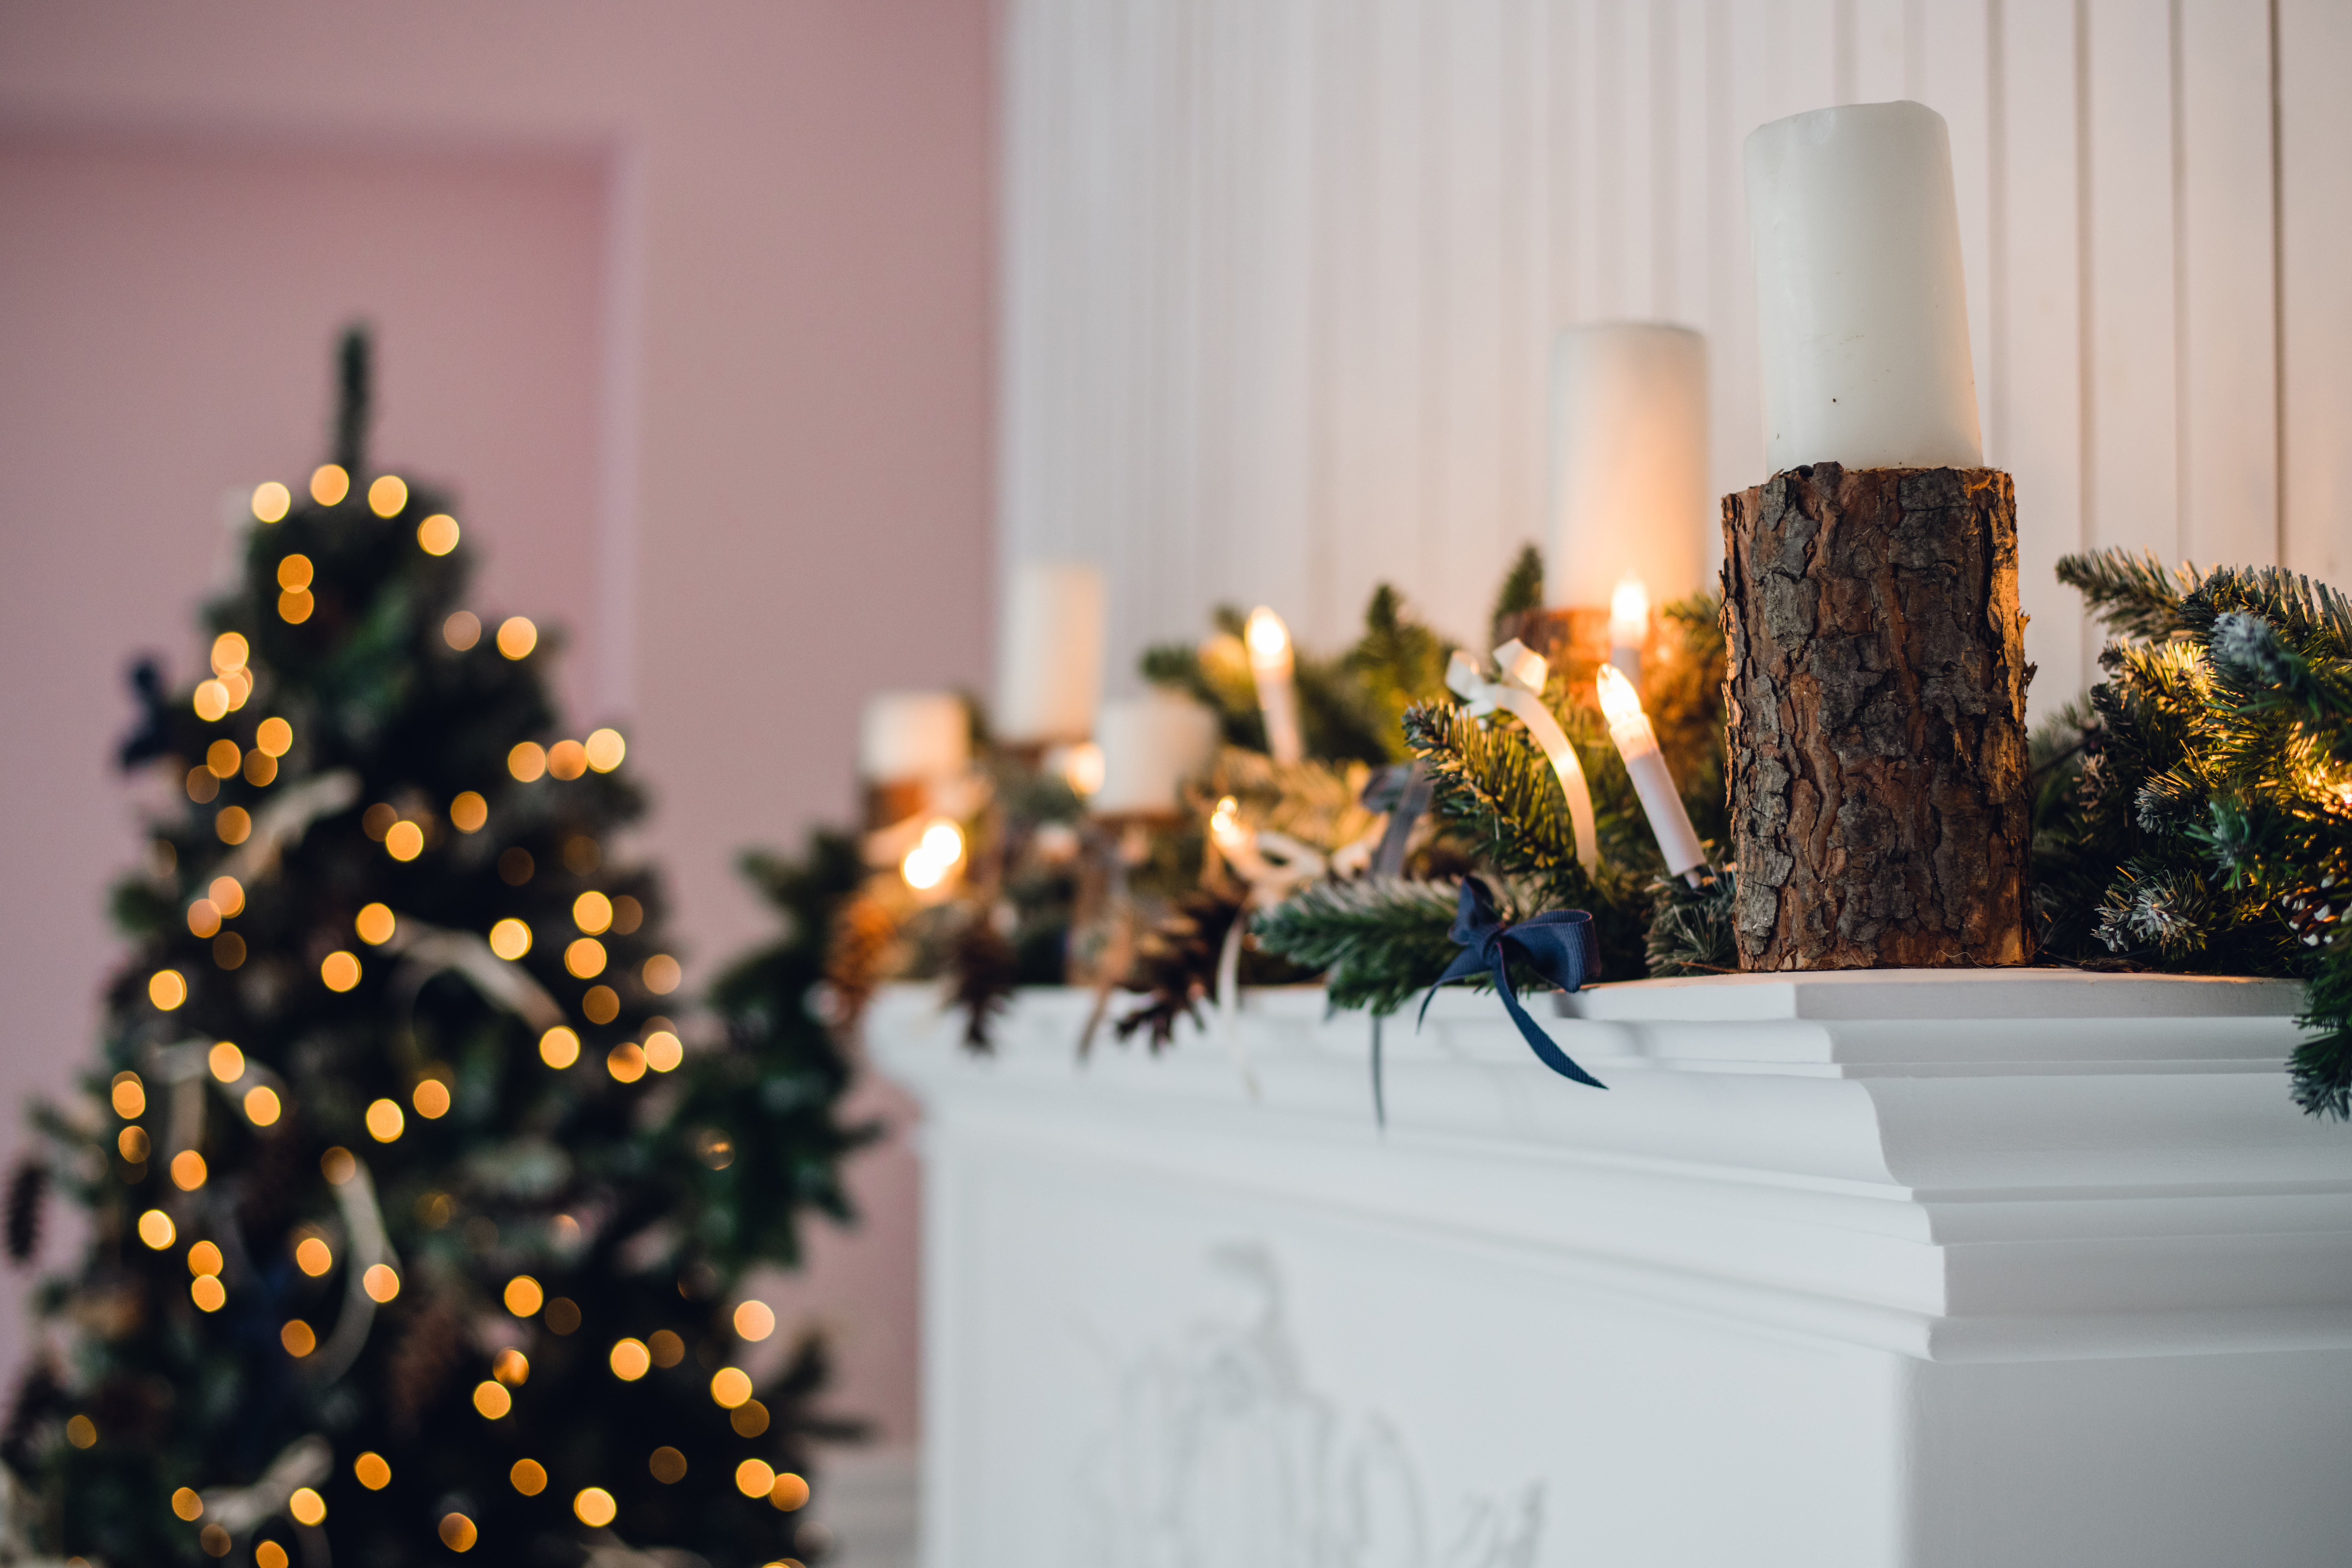 Christmas Fireplace, Xmas Lights Decoration, Tree Branches, Candles And Pine Pieces